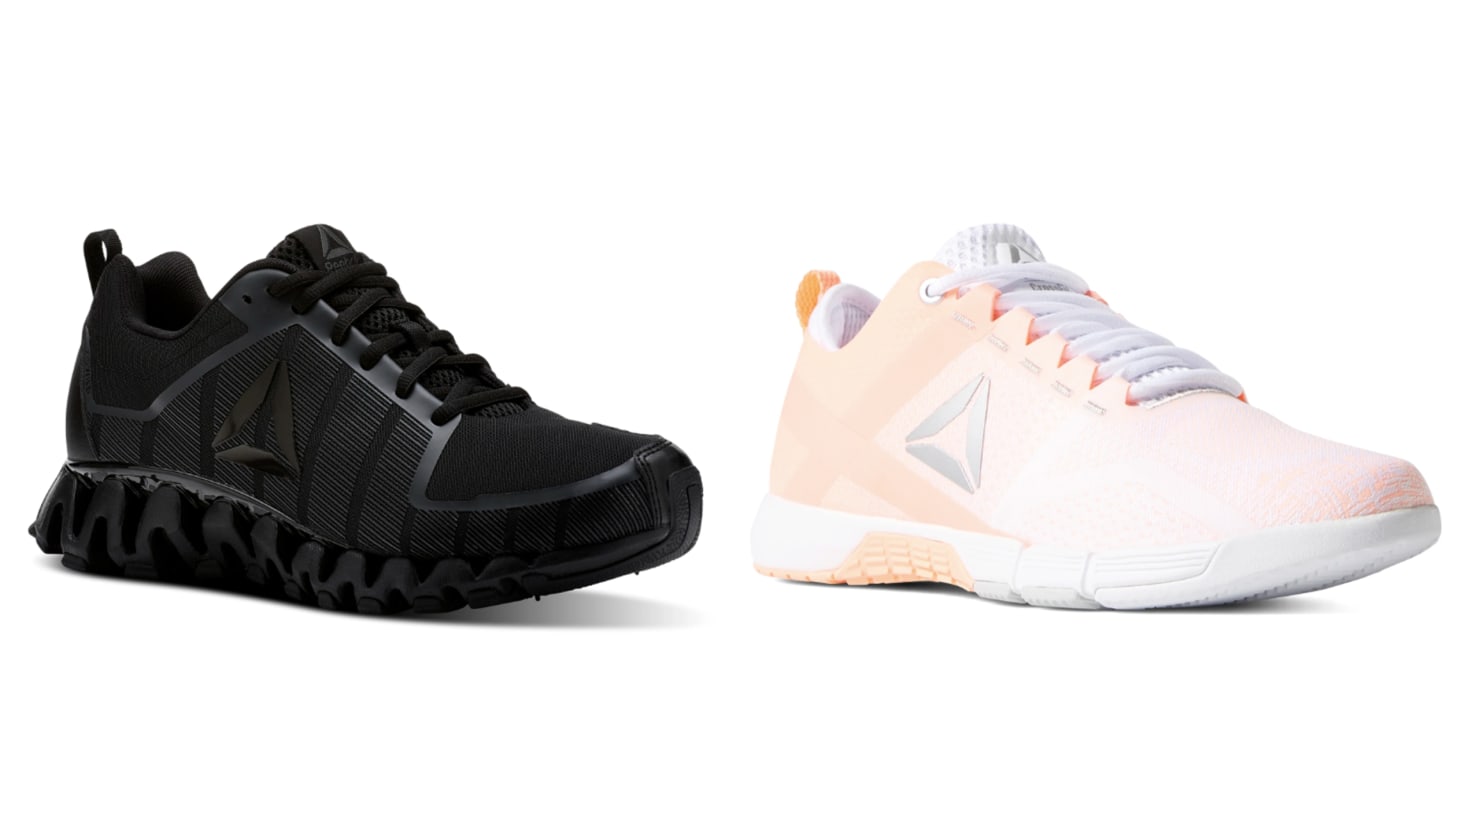 Upgrade Your Workout With New Reebok Gear While It’s 40% Off